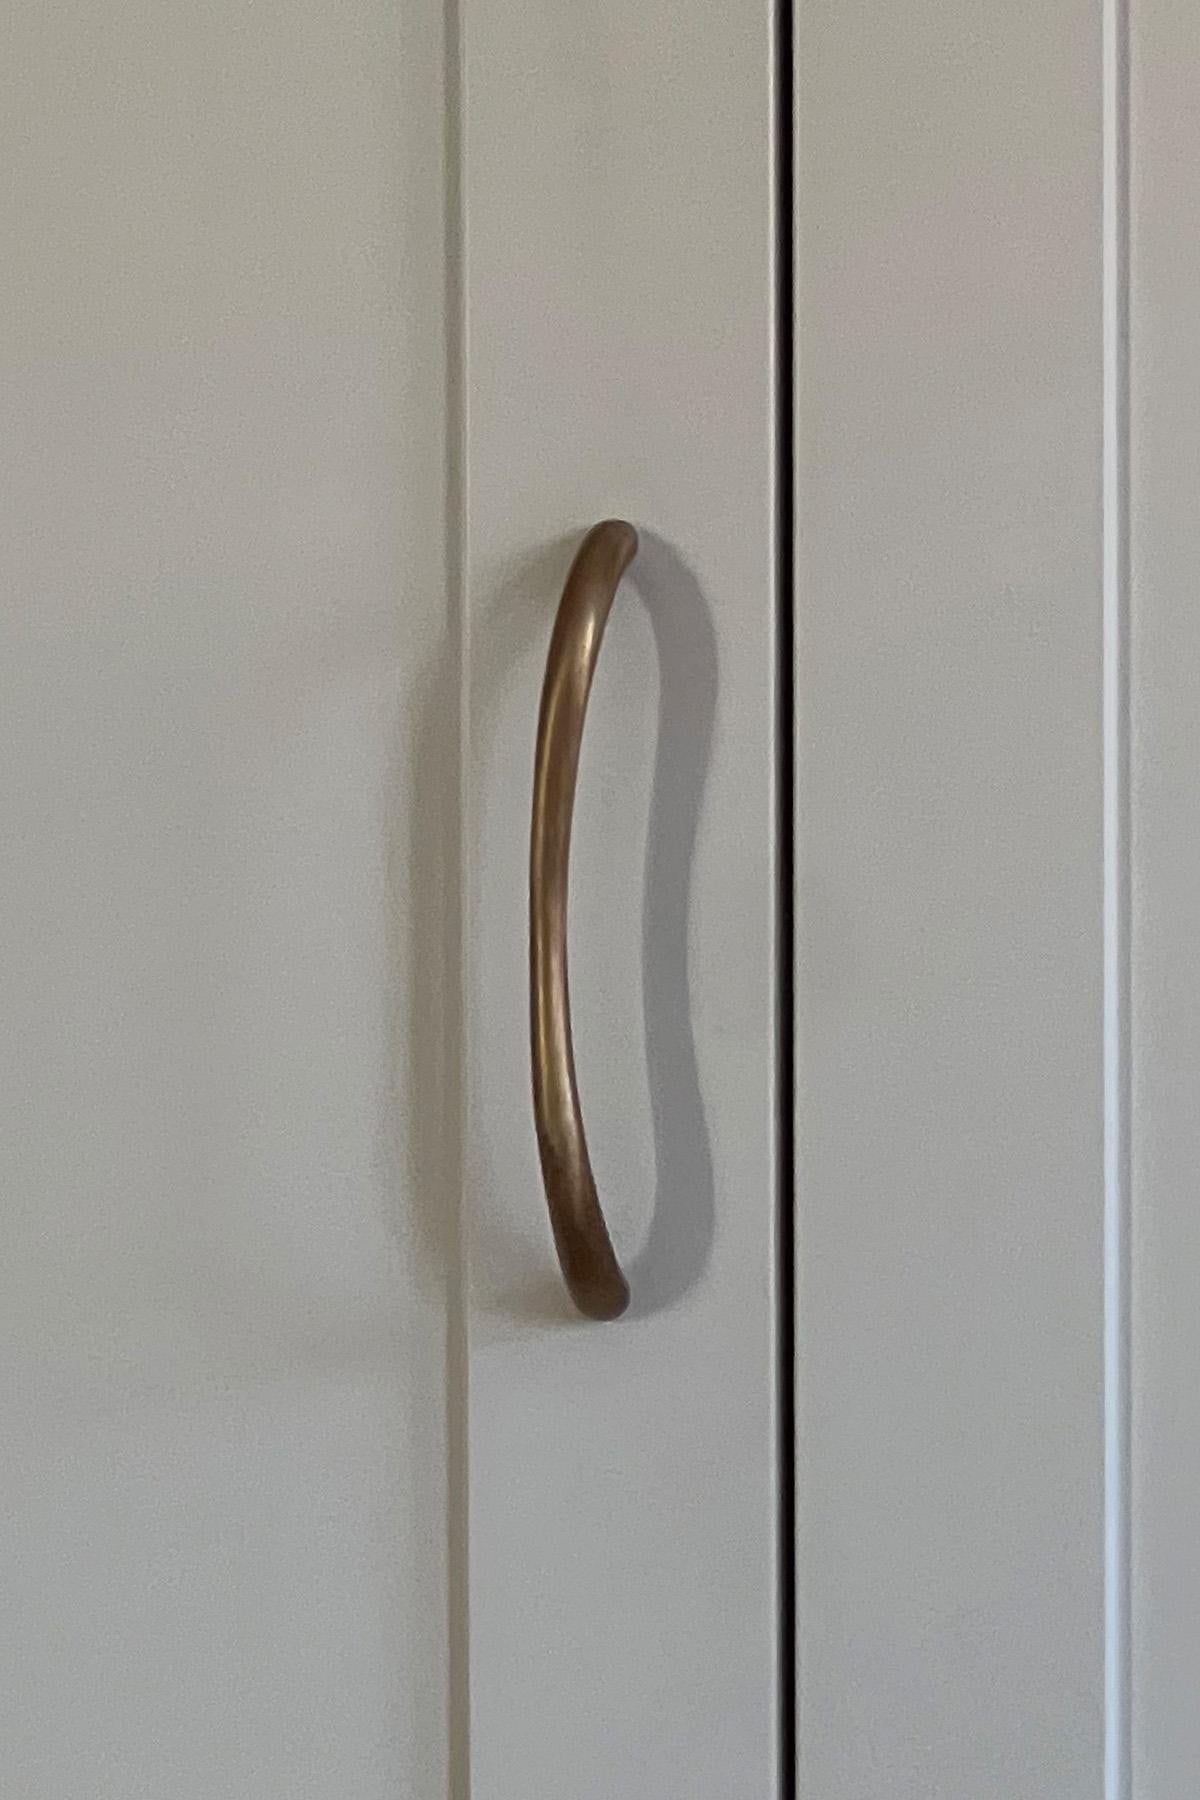 Organic Modern Contemporary Door Handle / Knob 'Suave' by Spaces Within, Amber Brass For Sale